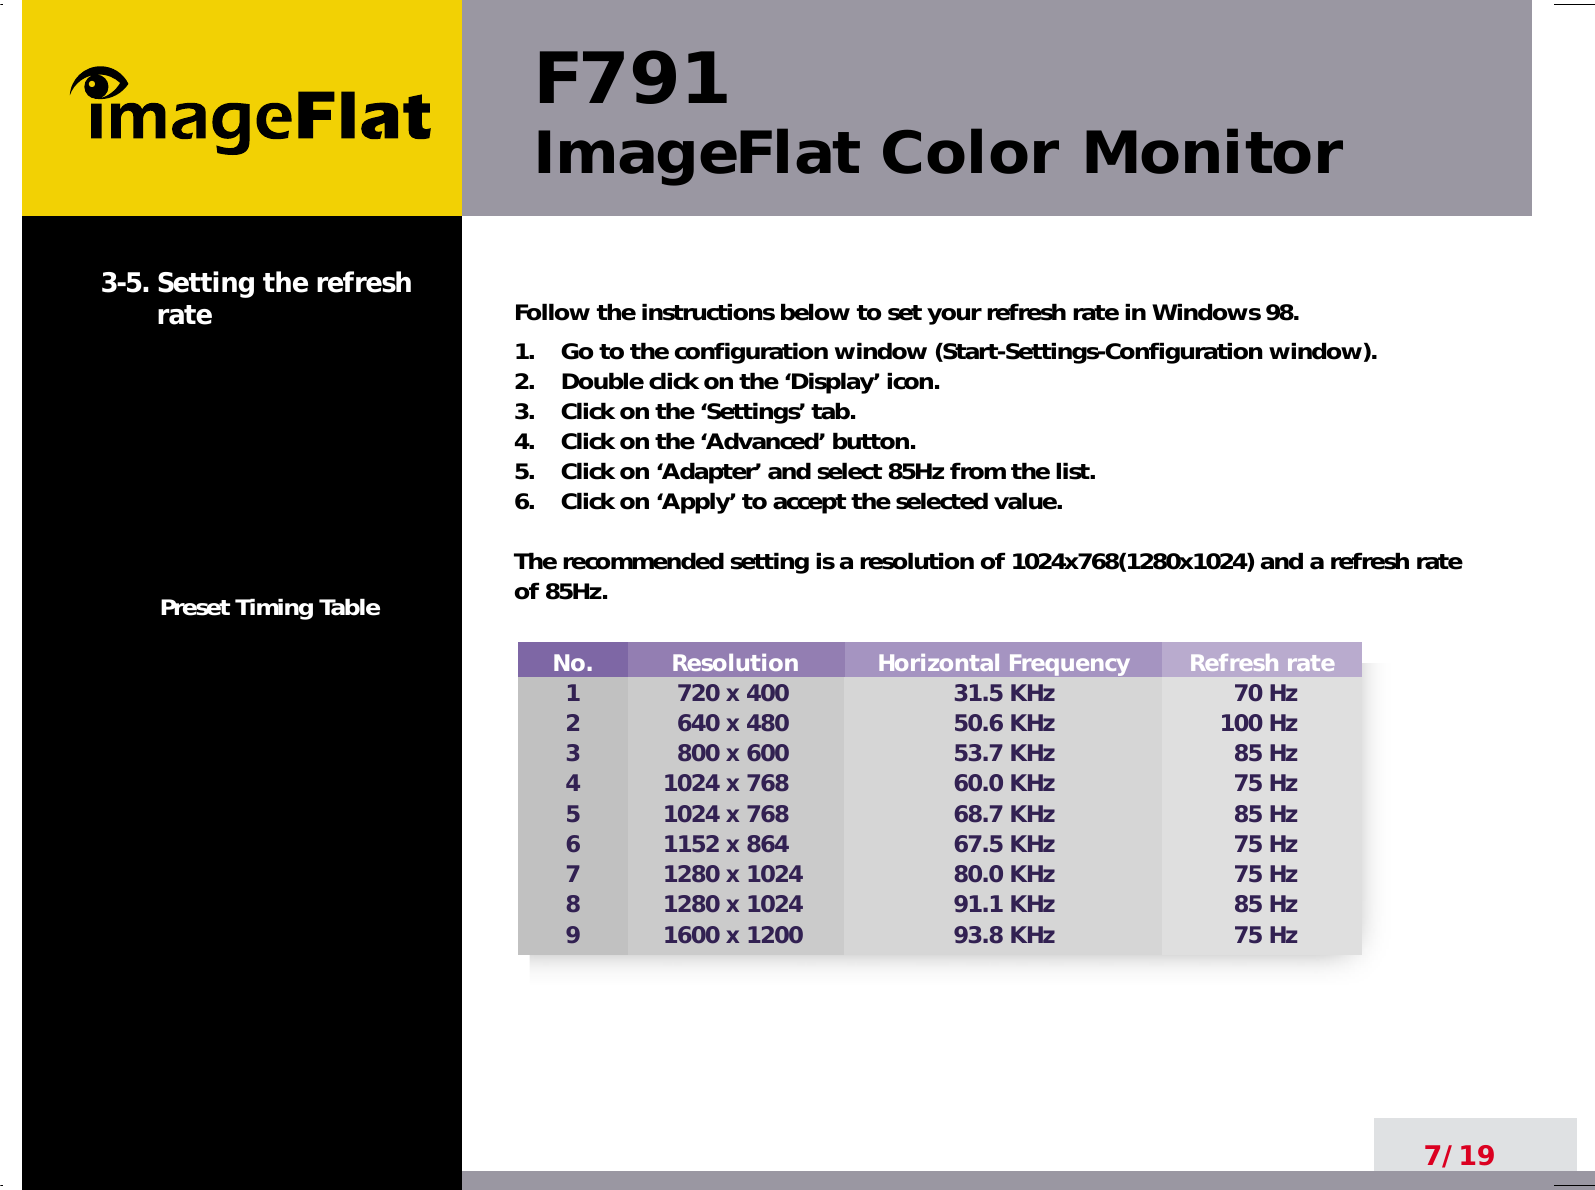 F791ImageFlat Color Monitor7/193-5. Setting the refreshratePreset Timing TableFollow the instructions below to set your refresh rate in Windows 98.1.    Go to the configuration window (Start-Settings-Configuration window).2.    Double click on the ‘Display’ icon.3.    Click on the ‘Settings’ tab.4.    Click on the ‘Advanced’ button.5.    Click on ‘Adapter’ and select 85Hz from the list.6.    Click on ‘Apply’ to accept the selected value.The recommended setting is a resolution of 1024x768(1280x1024) and a refresh rateof 85Hz.No.123456789Resolution720 x 400640 x 480800 x 6001024 x 7681024 x 7681152 x 8641280 x 10241280 x 10241600 x 1200Refresh rate70 Hz100 Hz85 Hz75 Hz85 Hz75 Hz75 Hz85 Hz75 HzHorizontal Frequency31.5 KHz50.6 KHz53.7 KHz60.0 KHz68.7 KHz67.5 KHz80.0 KHz91.1 KHz93.8 KHz